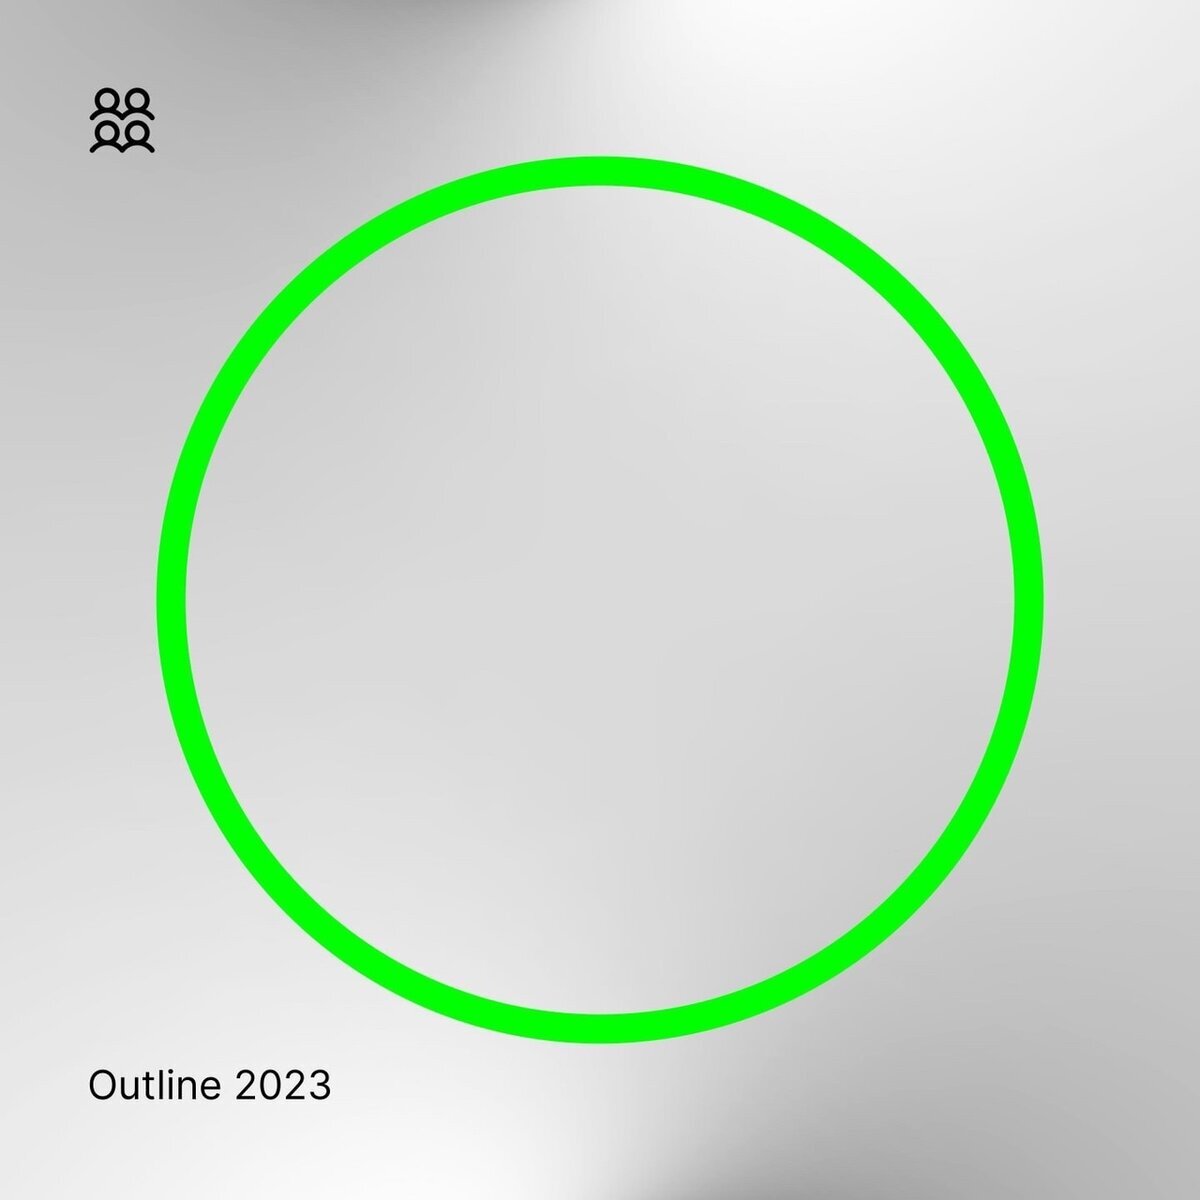 Outline 2023